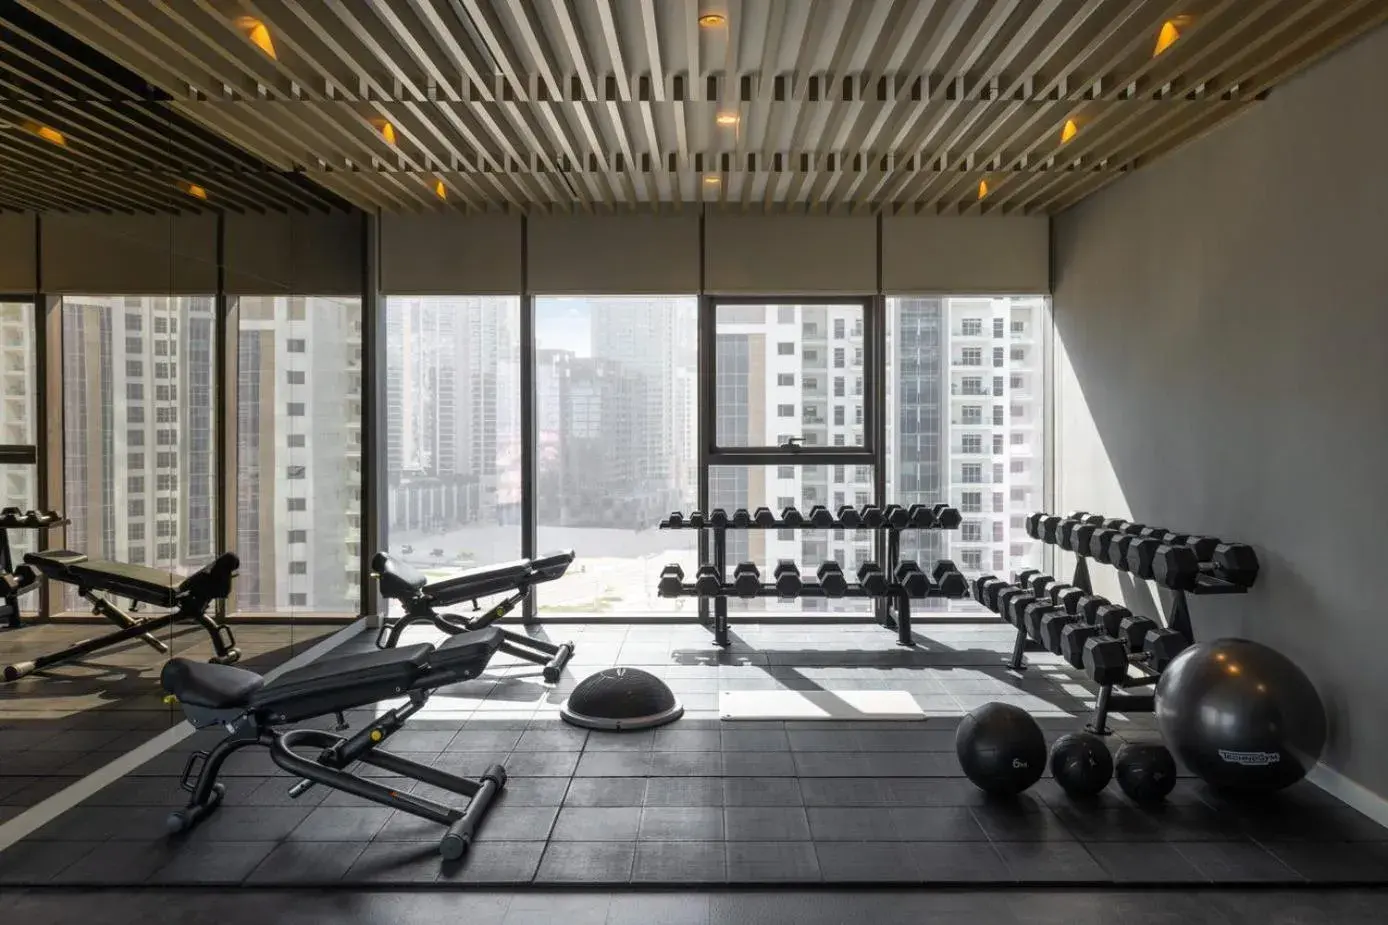 Fitness centre/facilities, Fitness Center/Facilities in Paramount Hotel Midtown